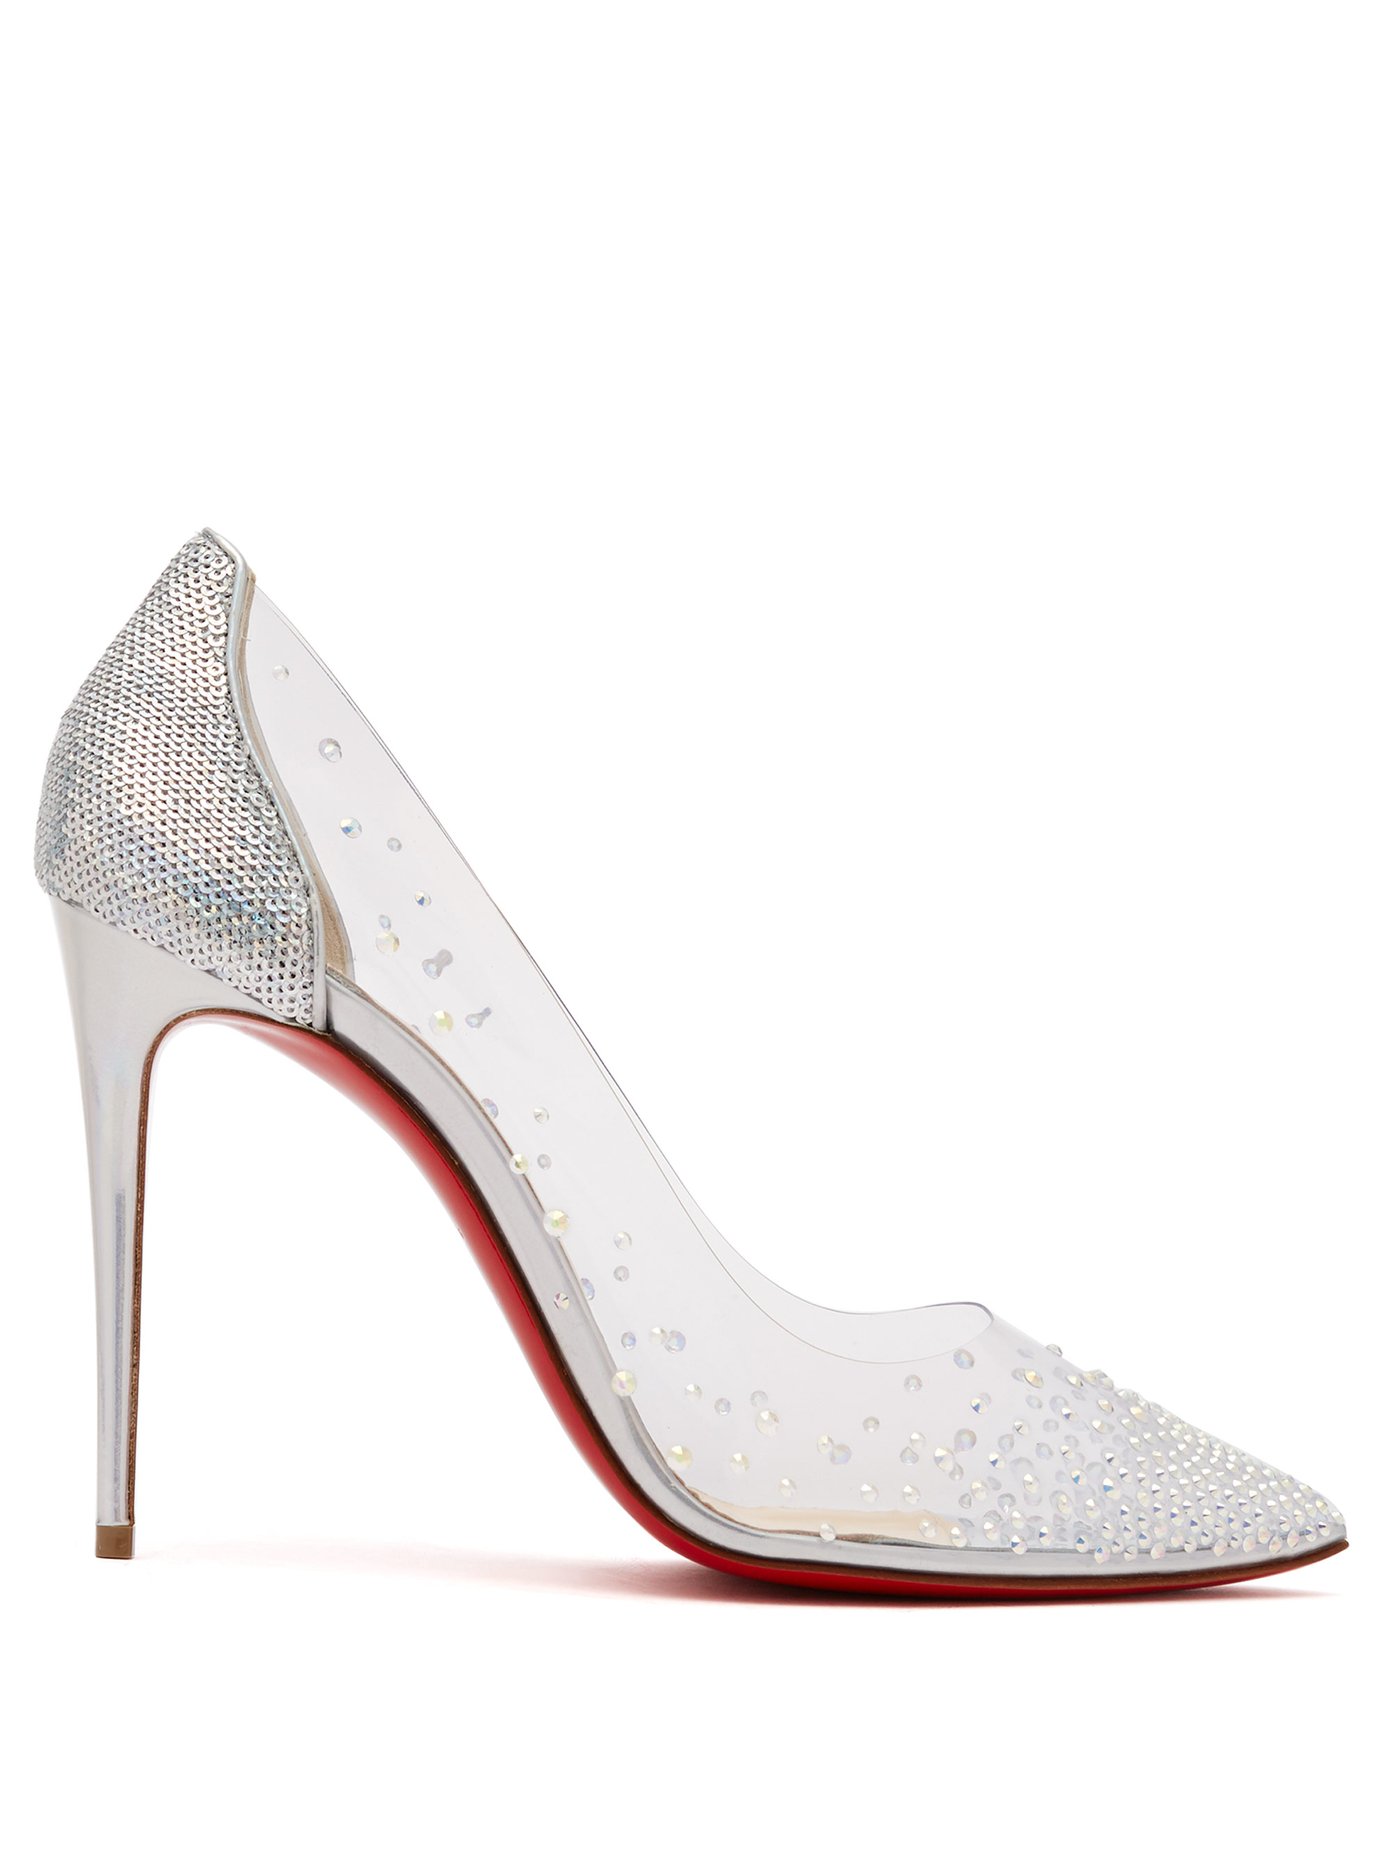 louboutin with crystals